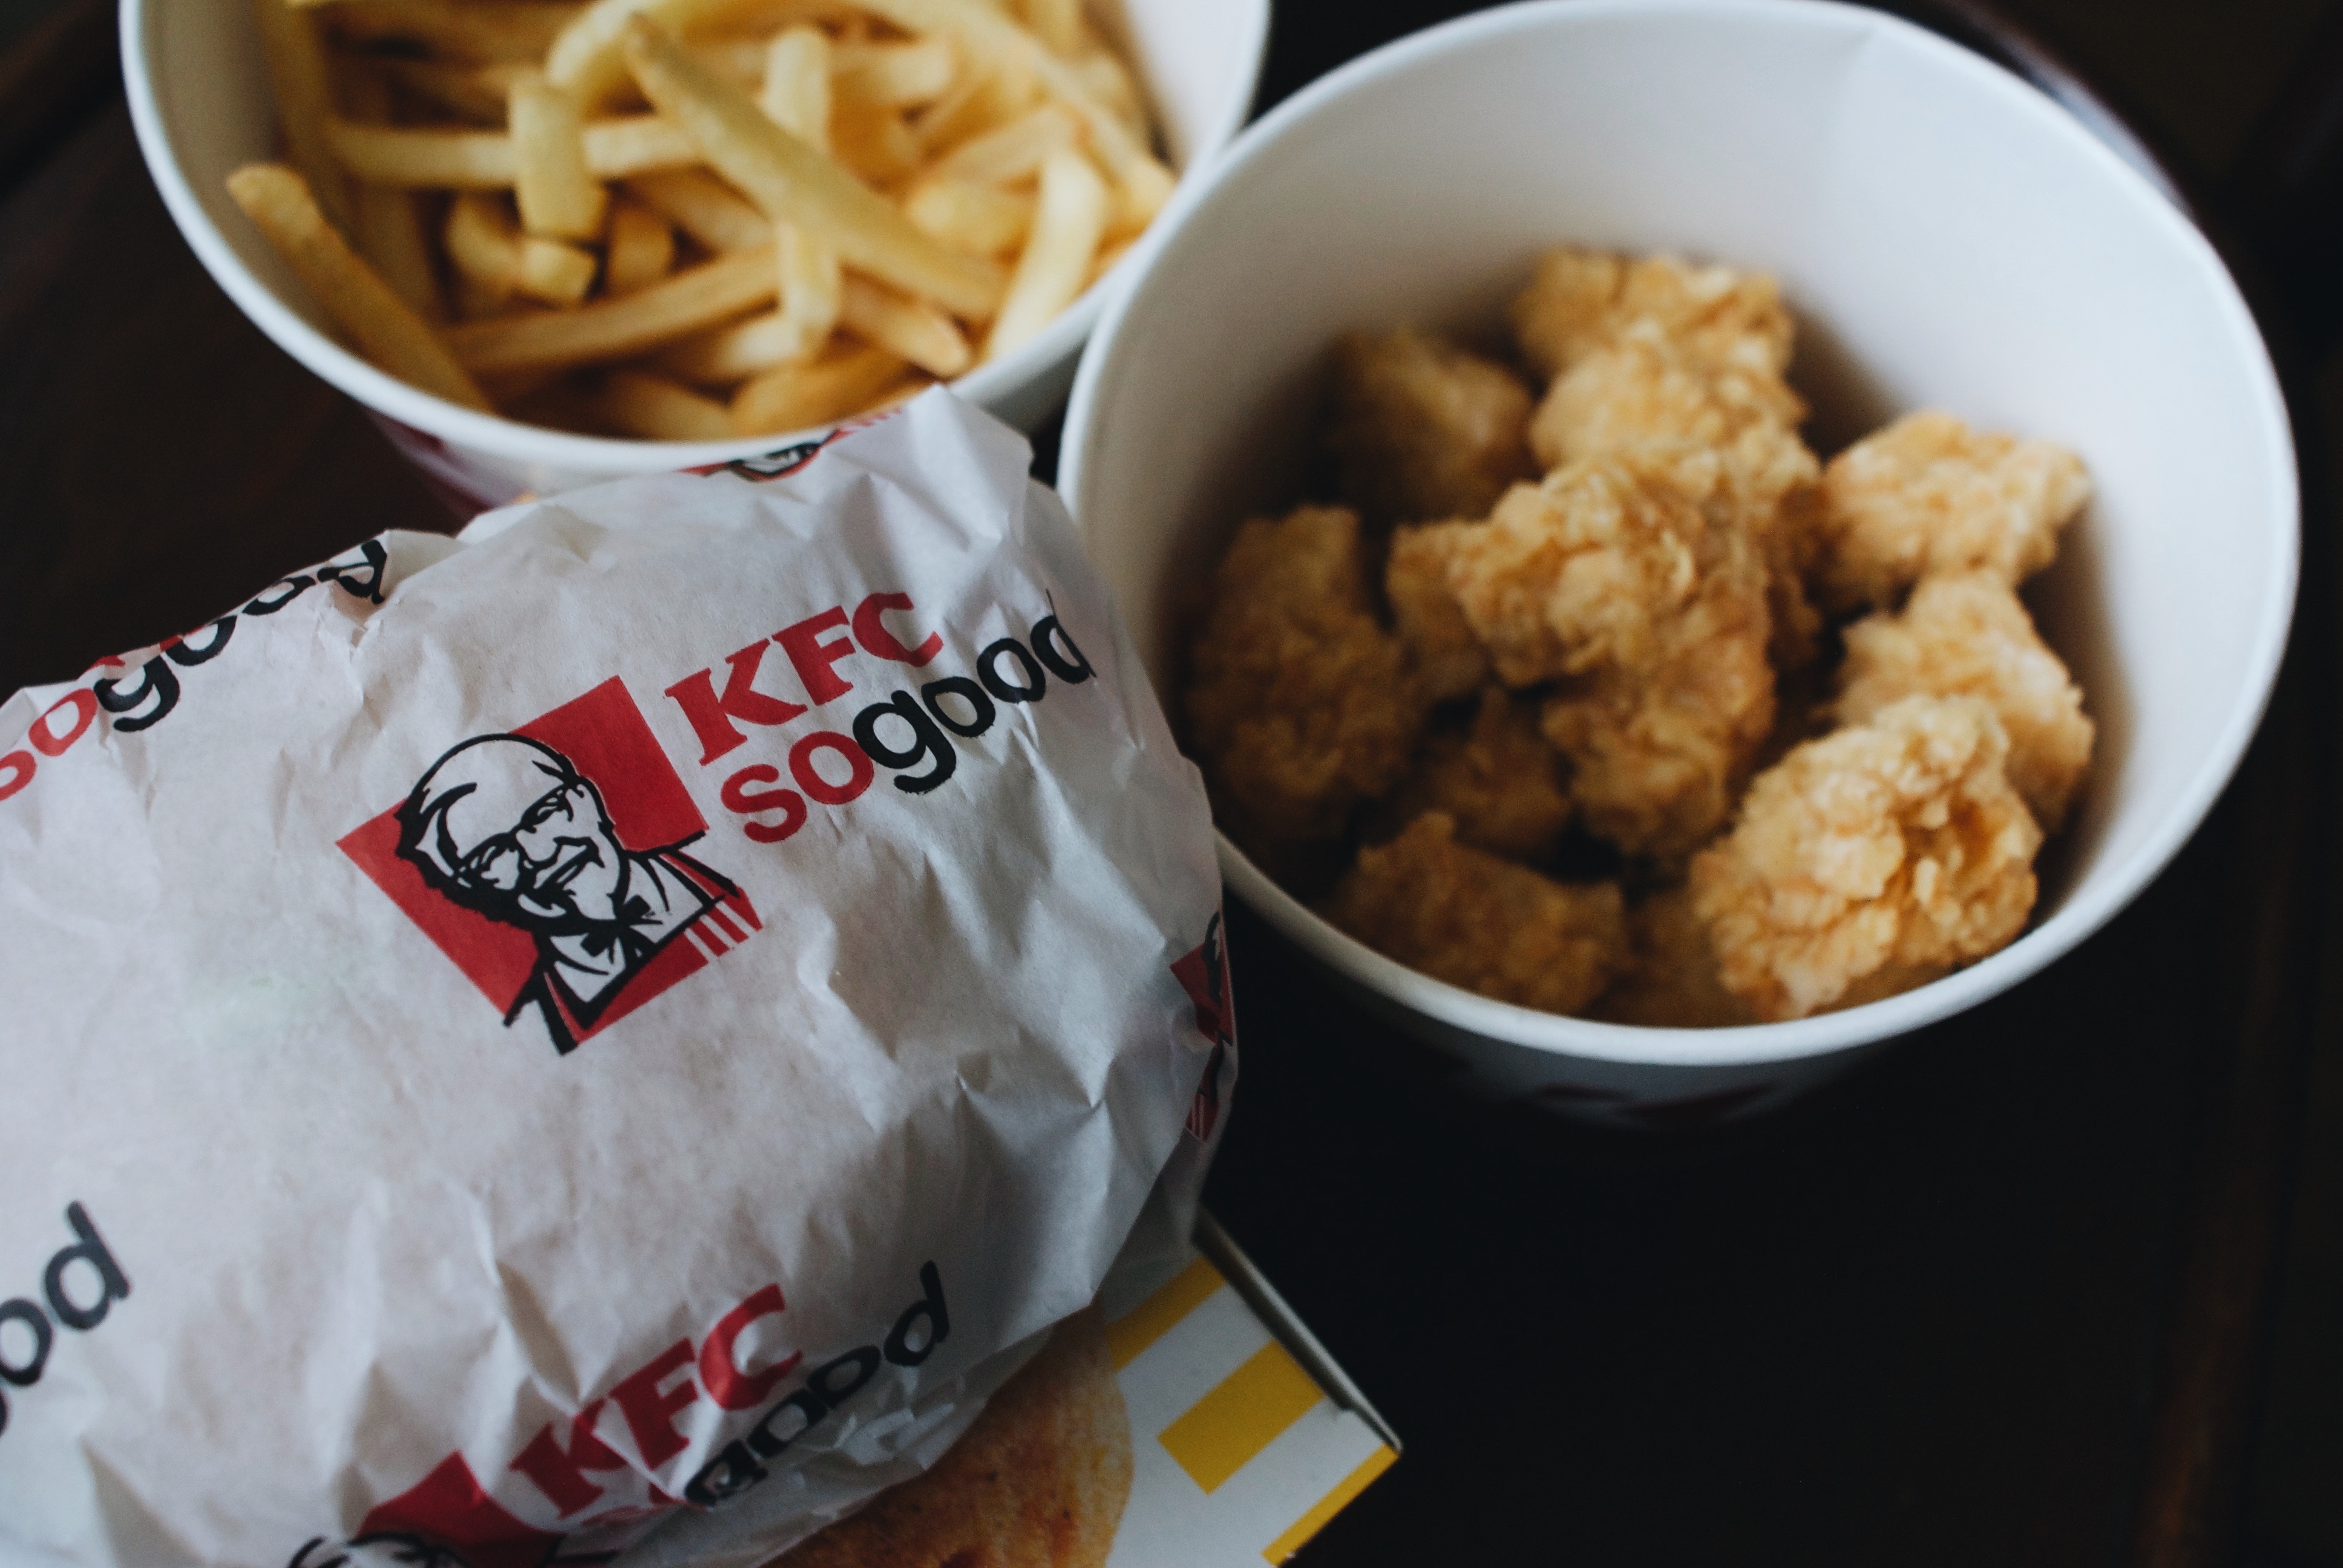 Image of KFC wrapper and bucket of fried chicken and fries.